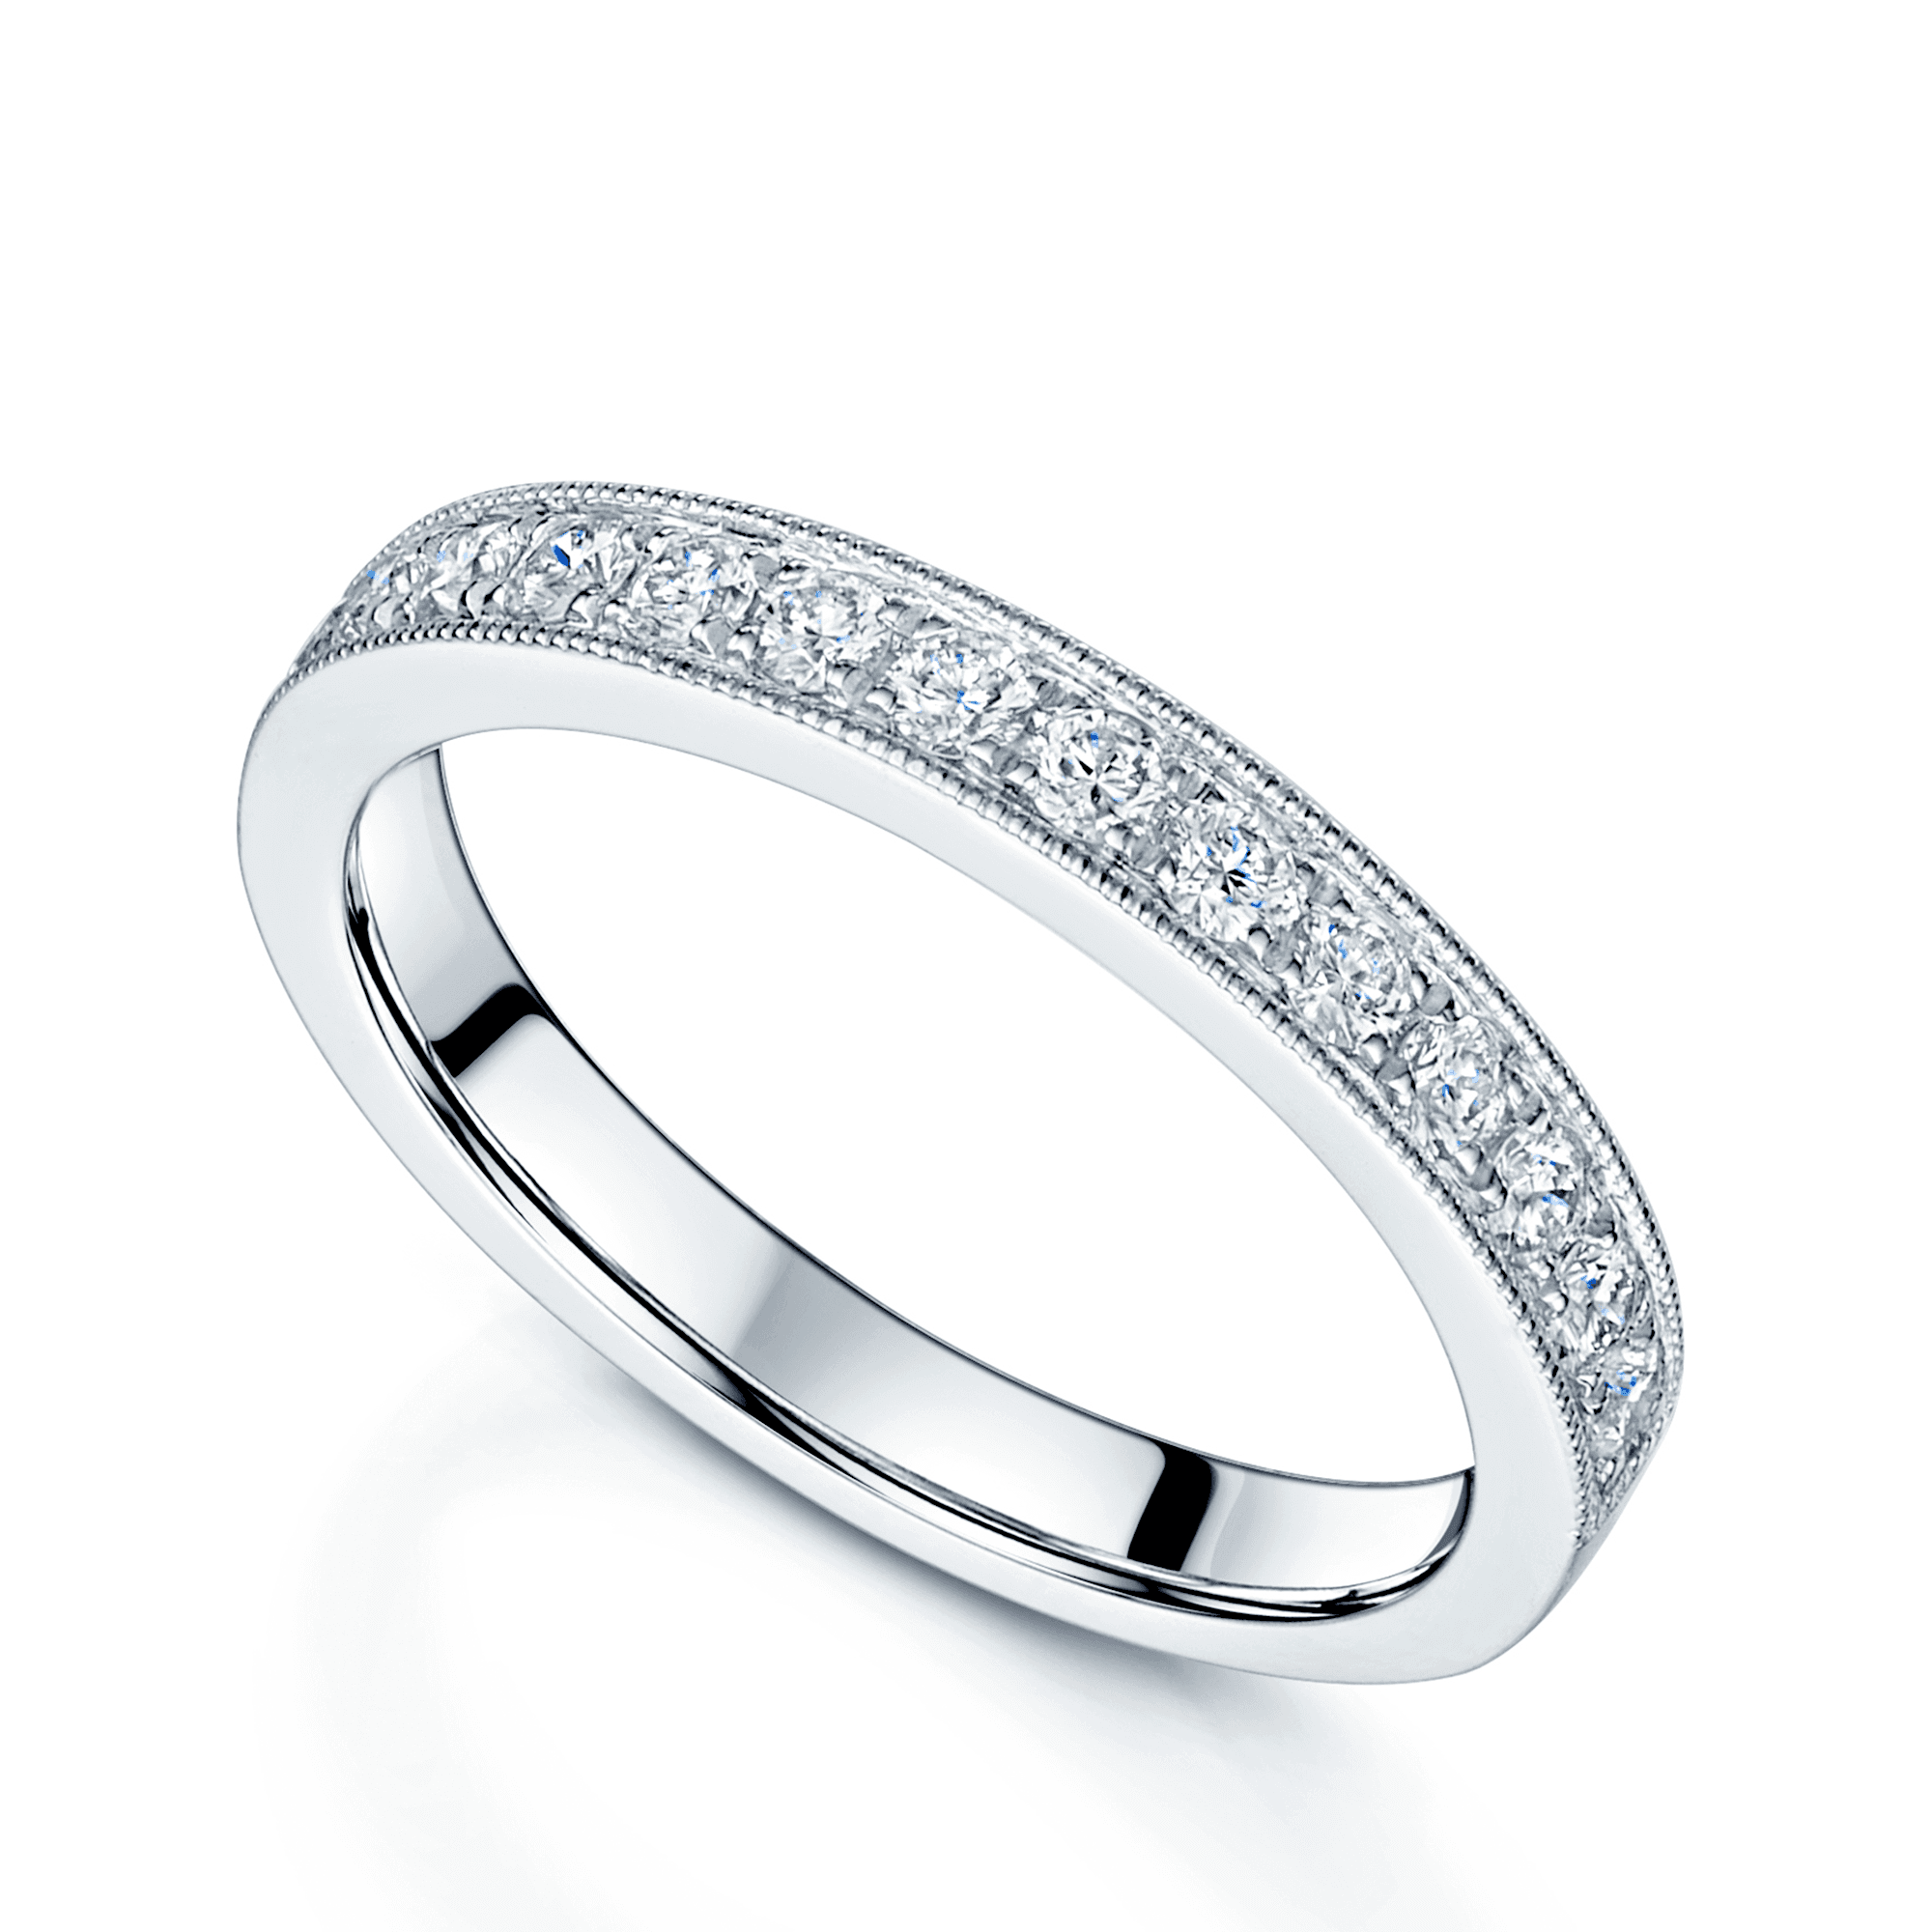 Platinum Diamond Channel Set Eternity Ring With Beaded Edging